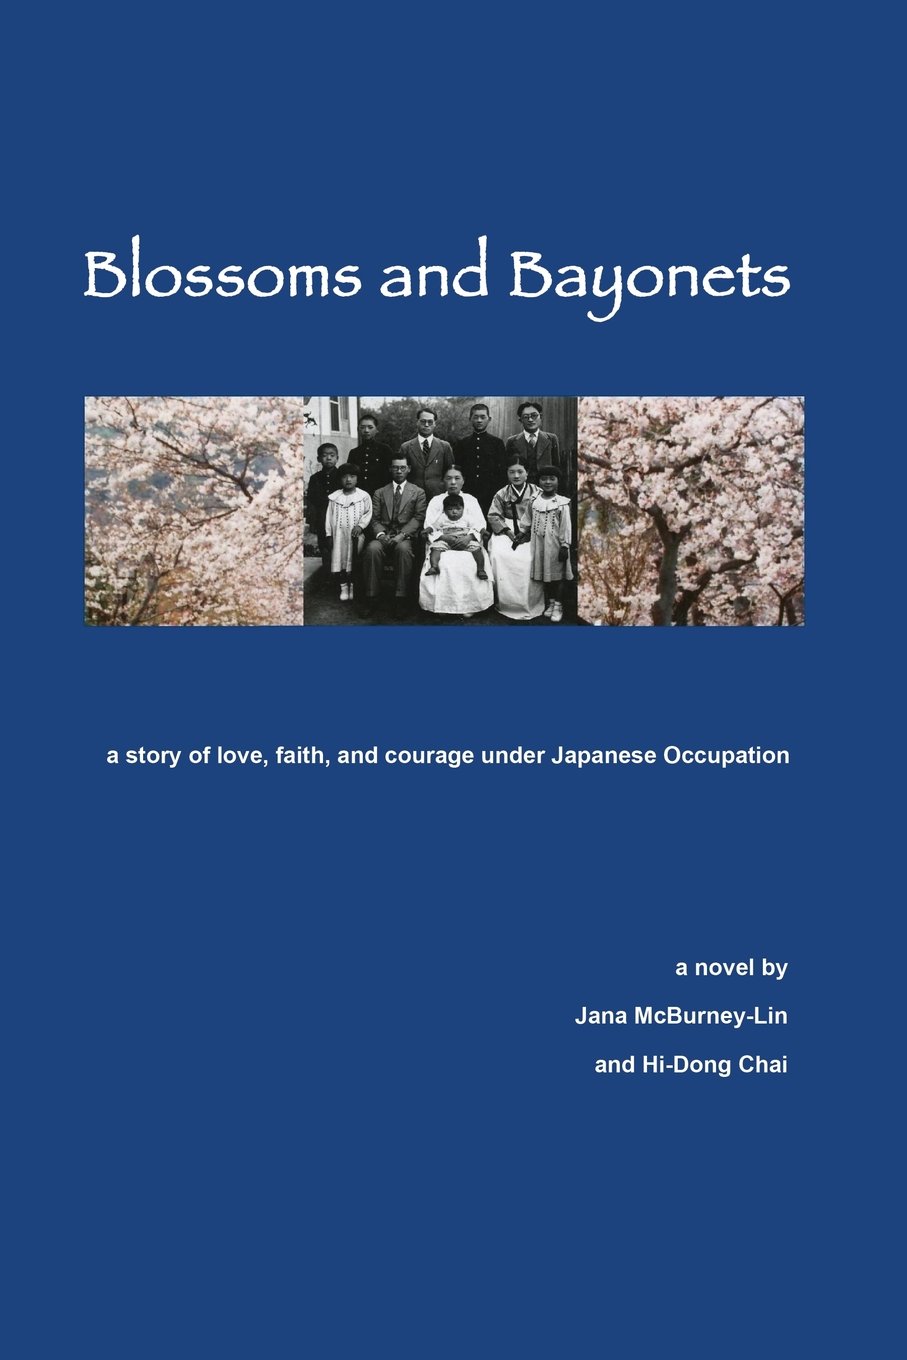 Blossoms and Bayonets: A Story of Love, Faith and Courage Under Japanese Occupation